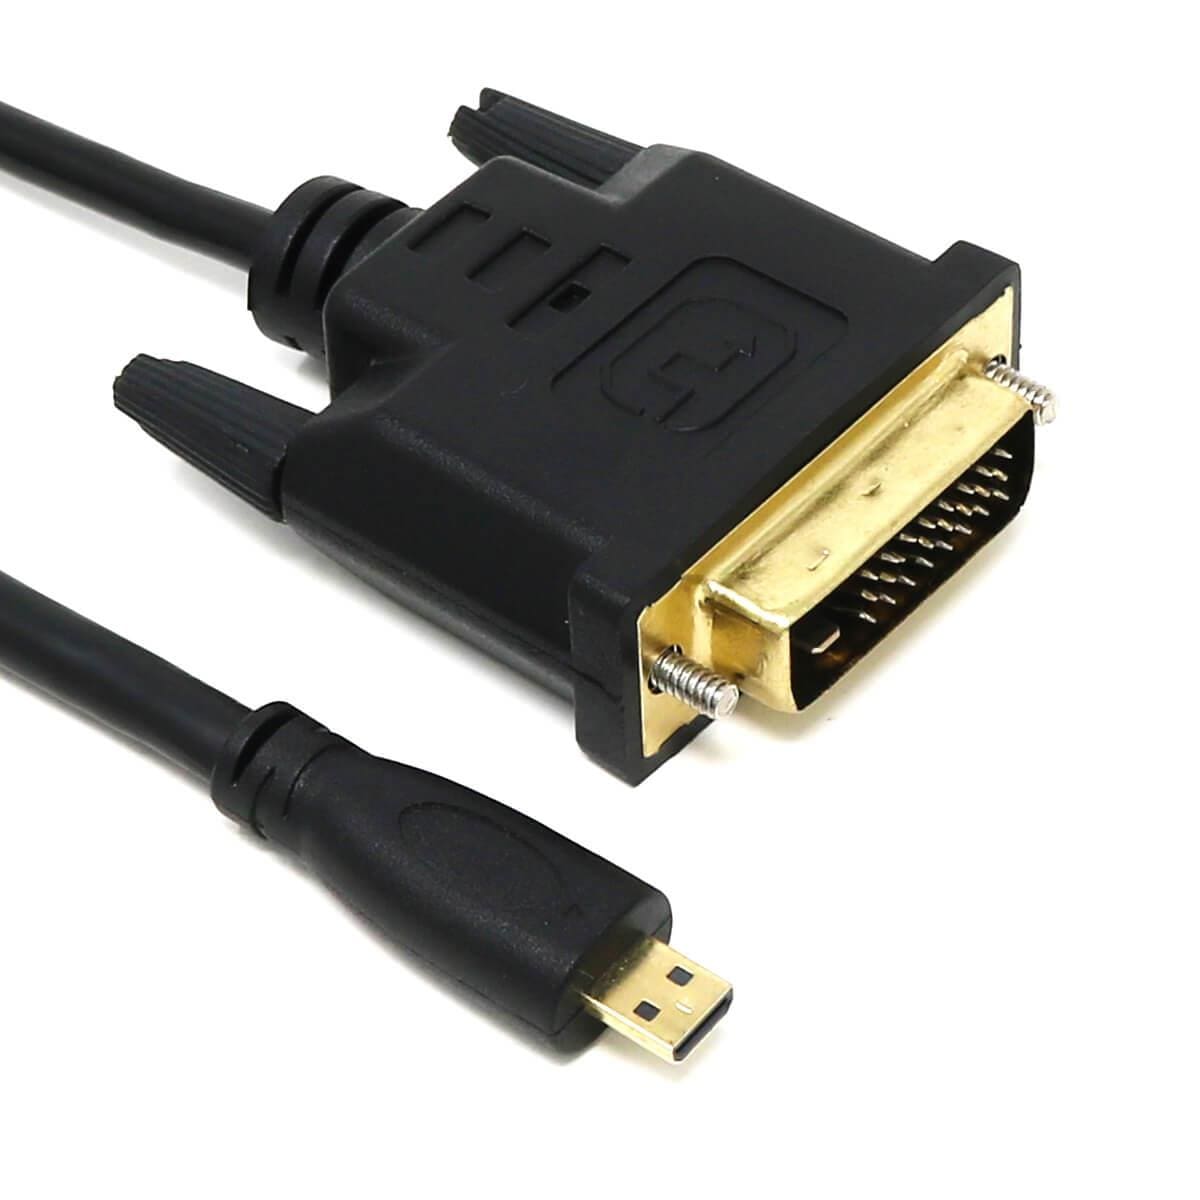 Dem Vedholdende abort Micro HDMI to DVI-D Cable for Raspberry Pi 4 | The Pi Hut